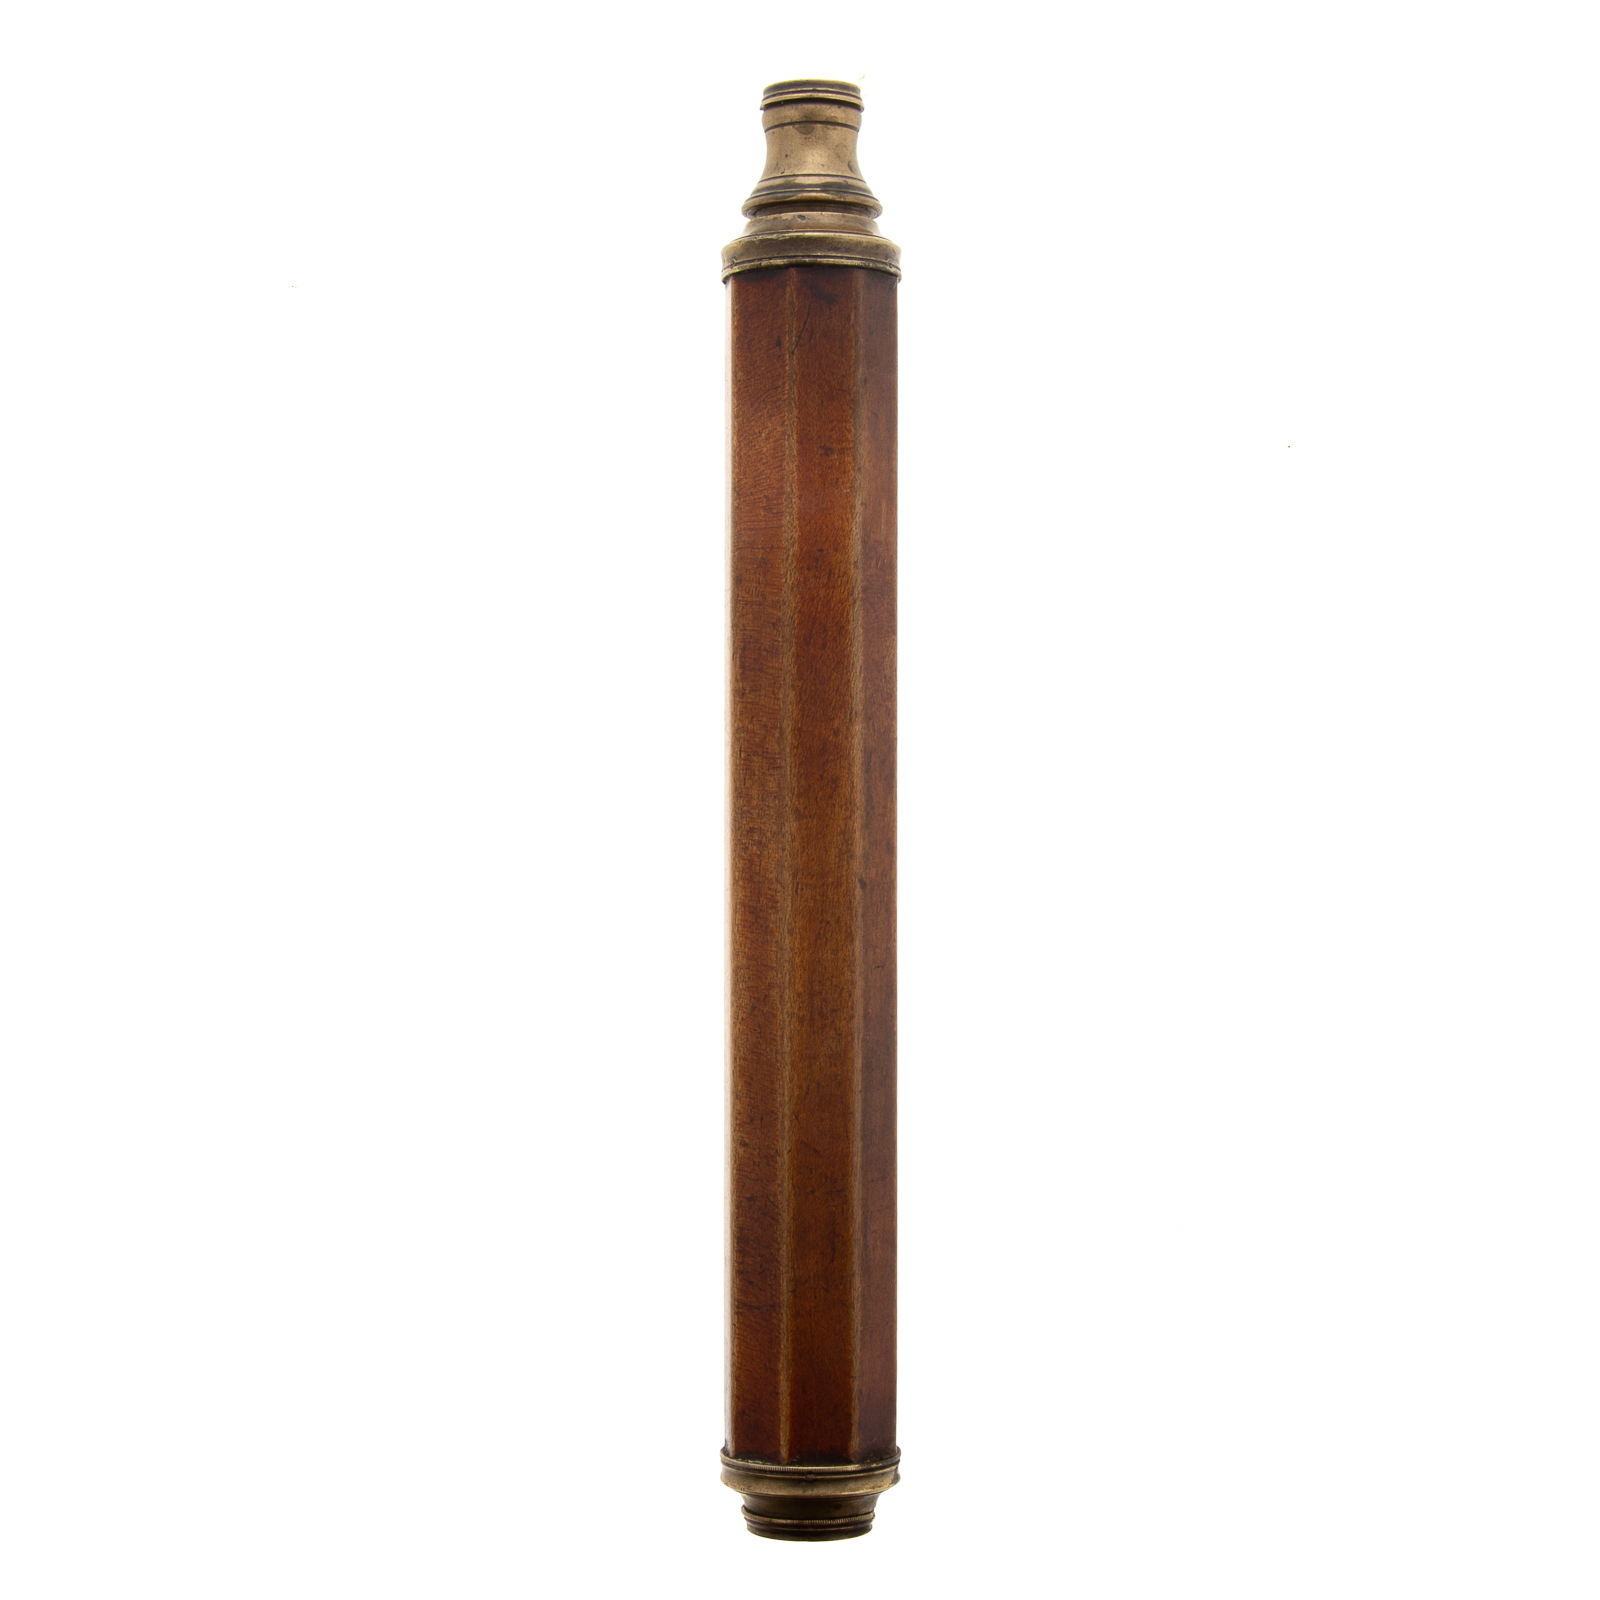 POCKET TELESCOPE WITH 8 SIDED WOODEN 33546d